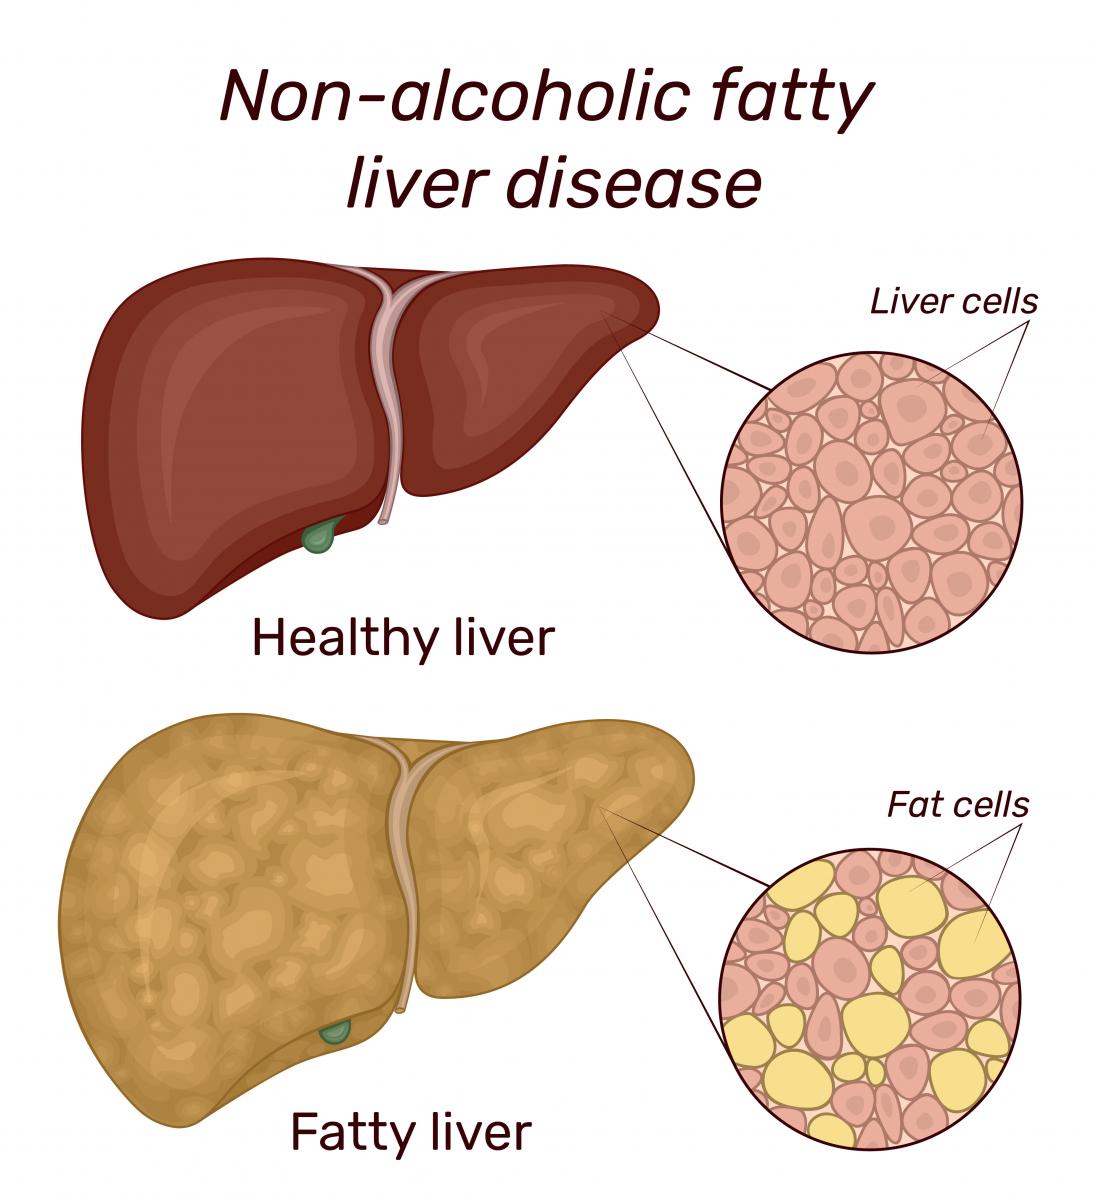 healthy liver compared to fattly liver